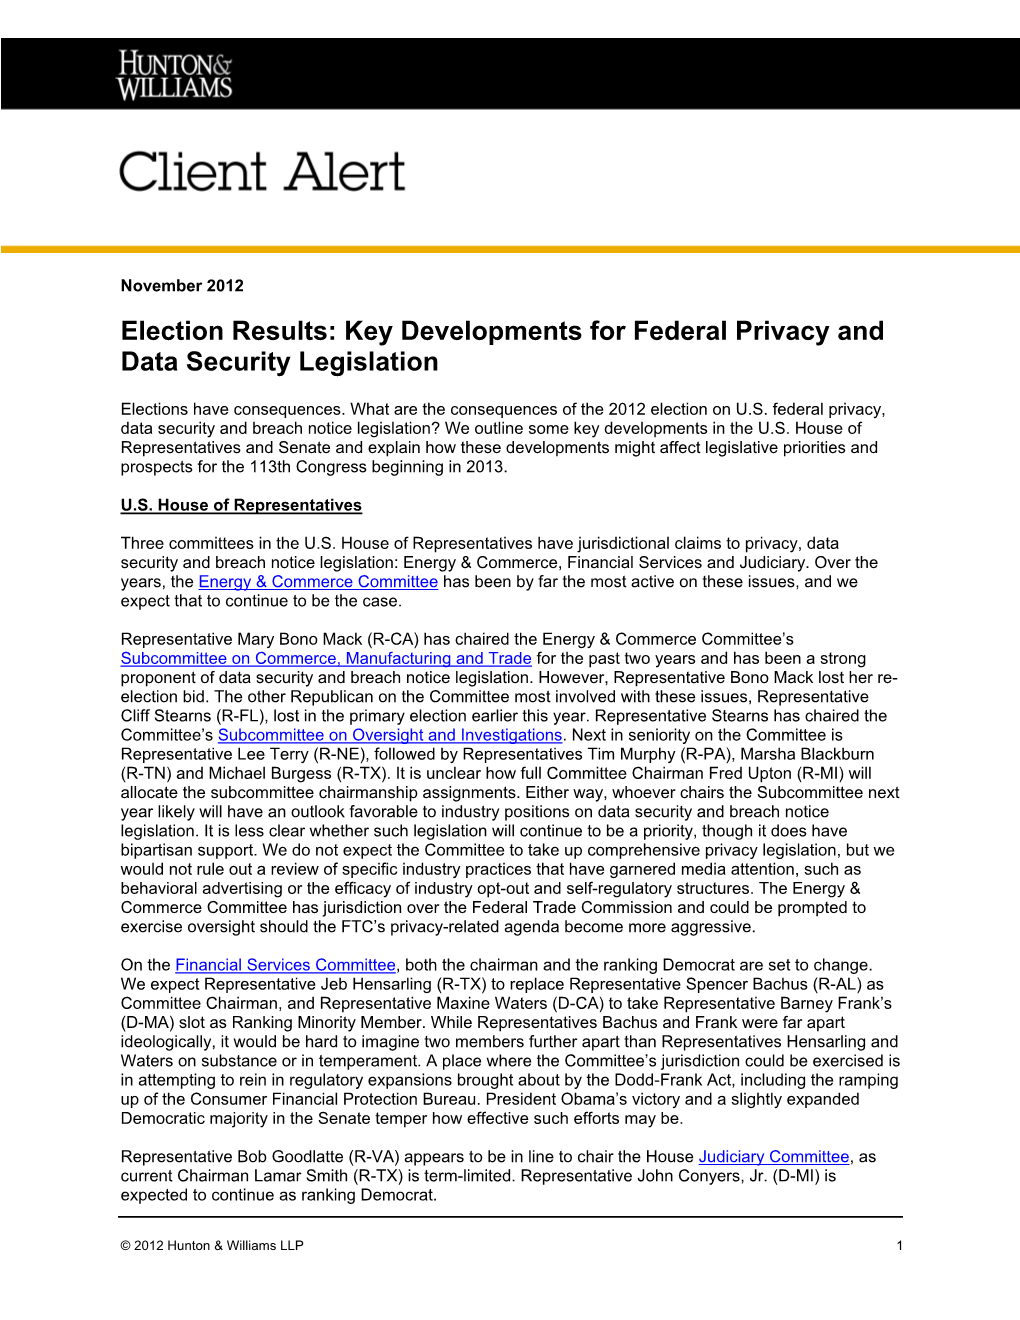 Election Results: Key Developments for Federal Privacy and Data Security Legislation